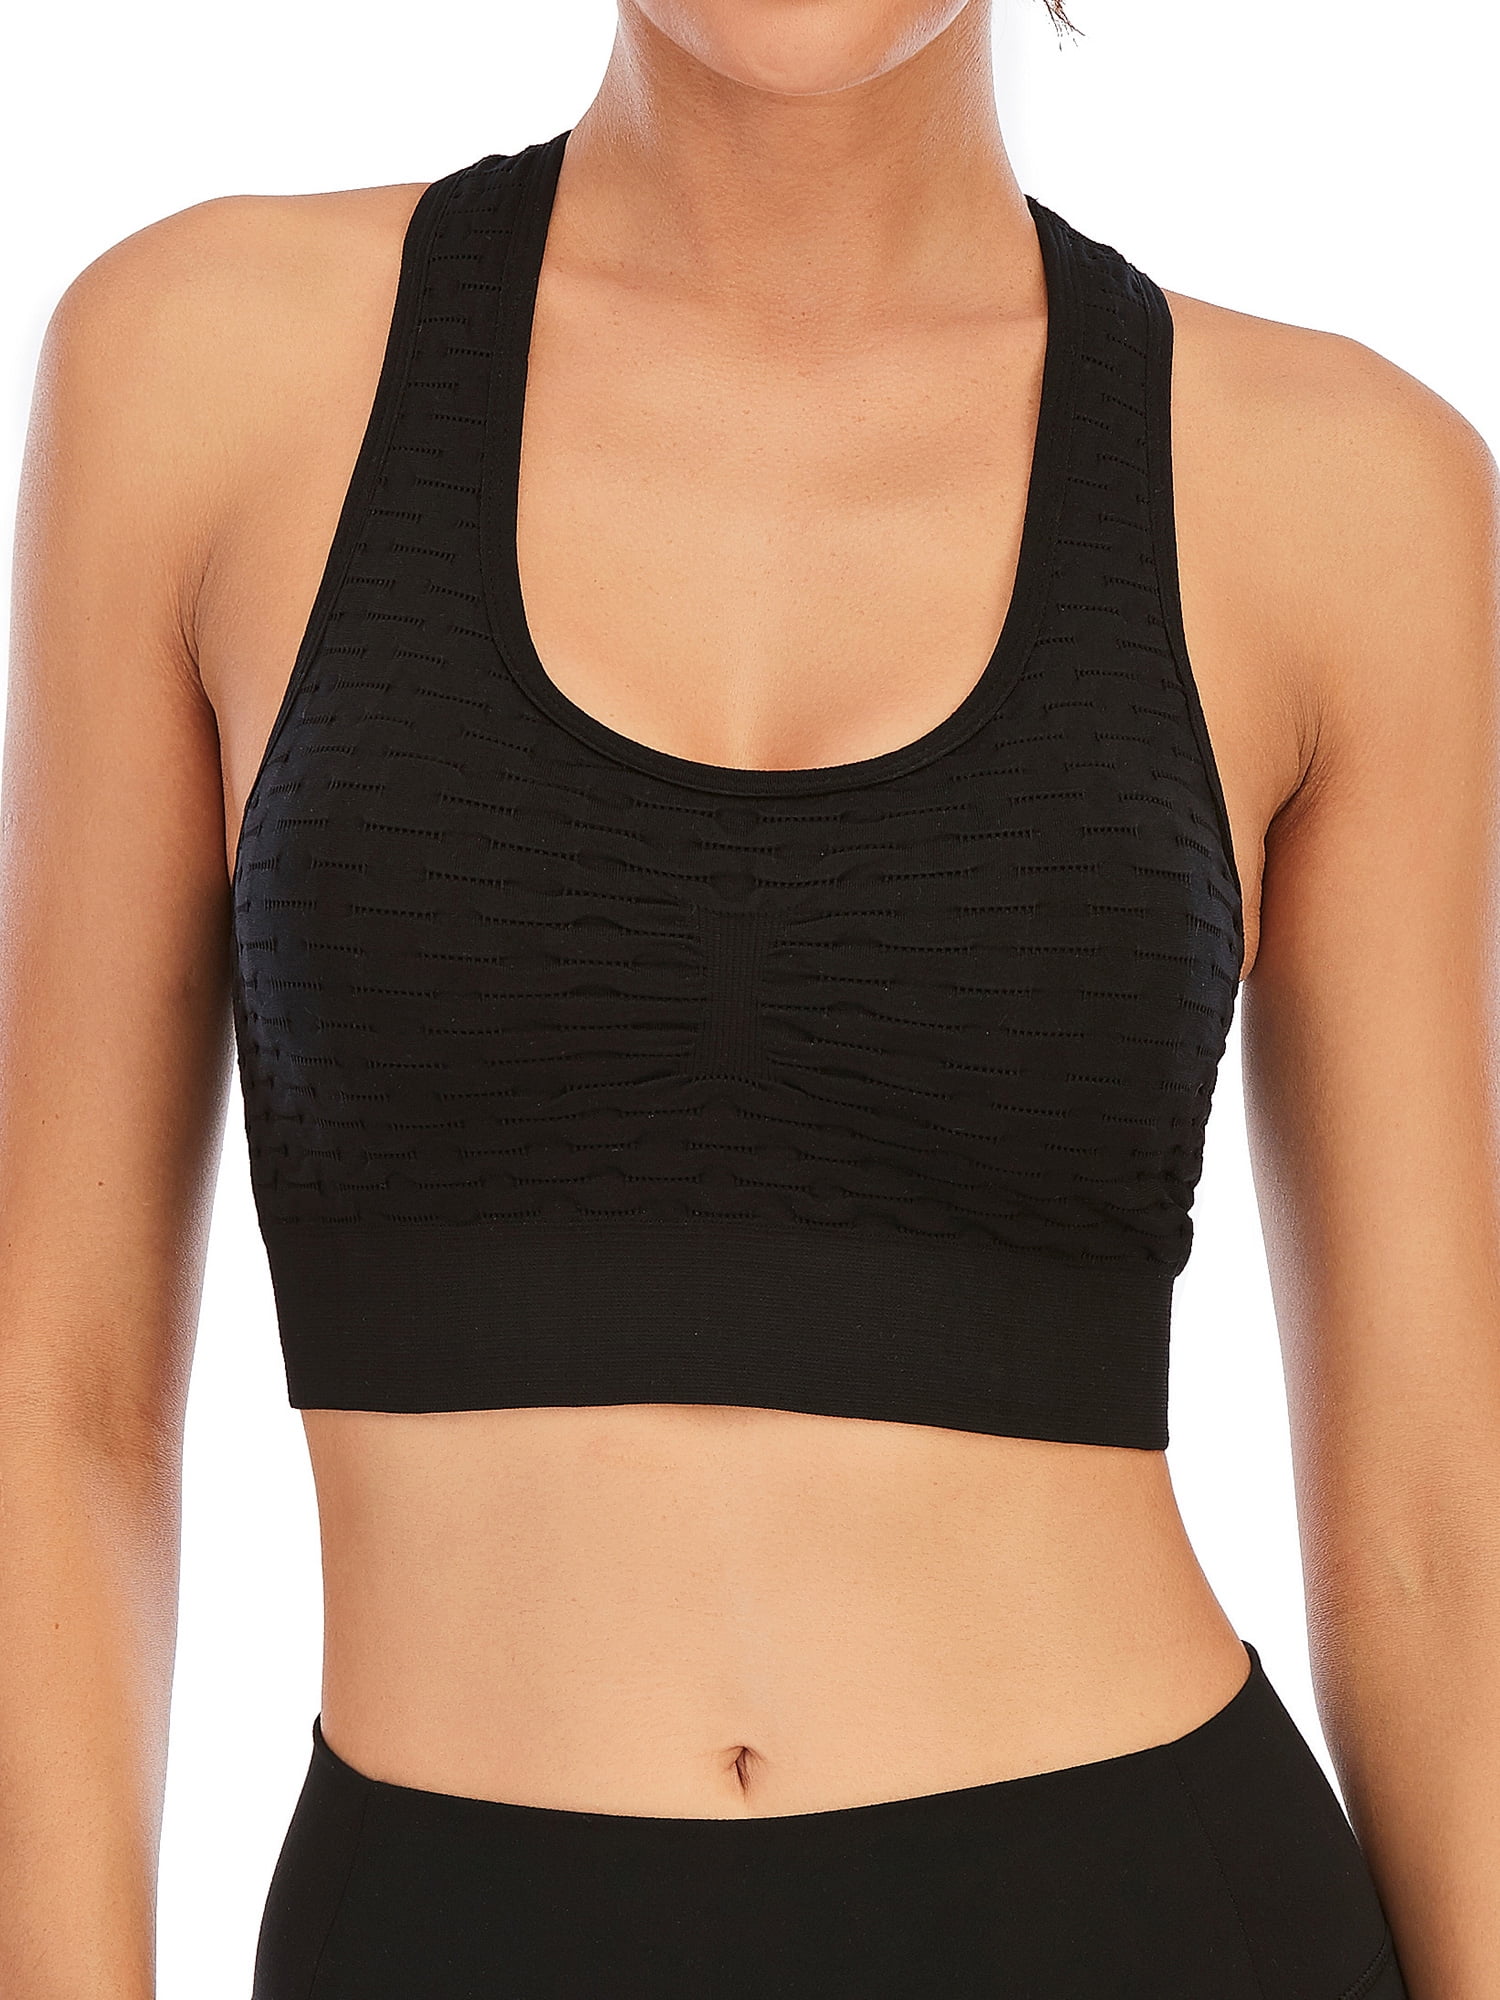 2 Pack Large Black/white Details about   Champion Women's Seamless Racerback Sports Bras 